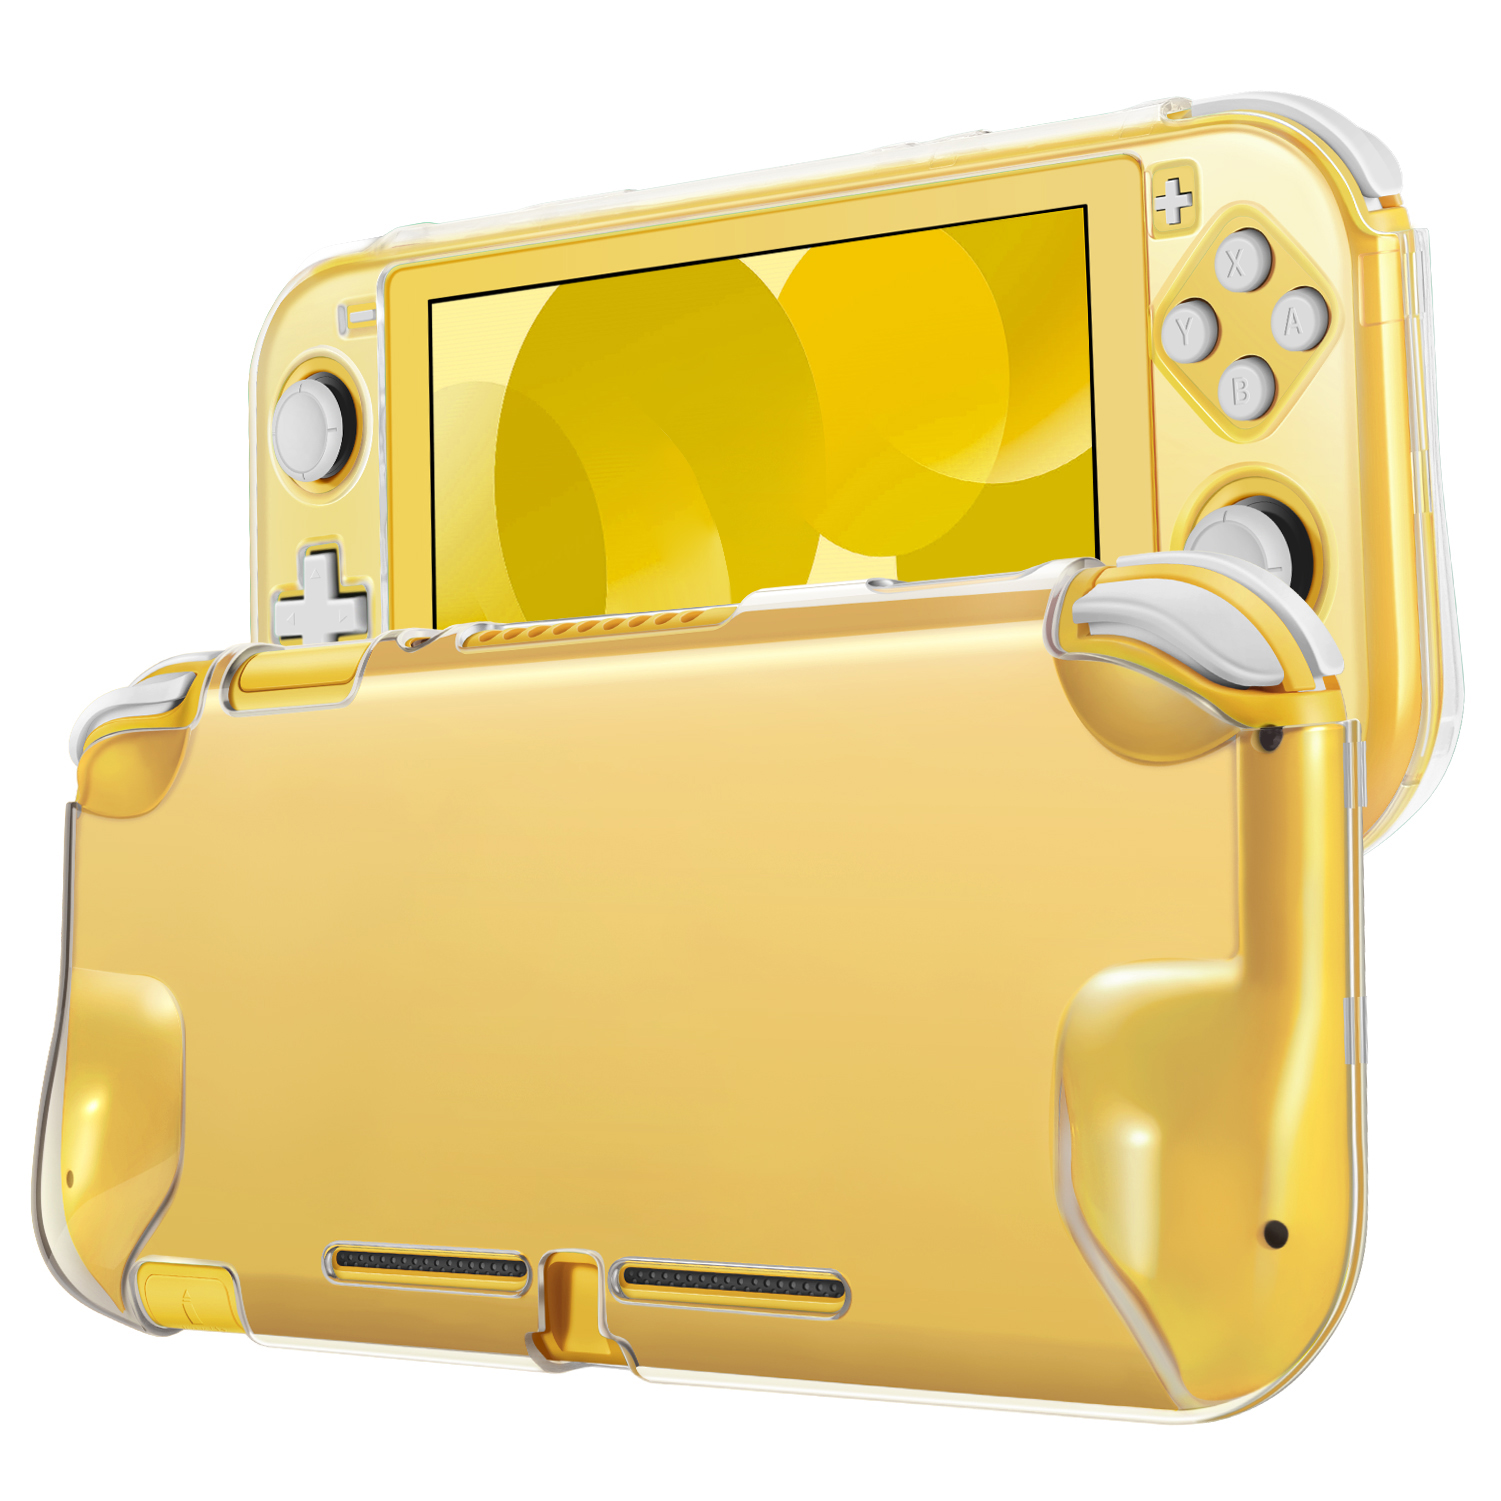 TNP Products Hard Case for Nintendo Switch Lite Case Skin Cover (Crystal  Clear) Comfort Grip Enhance, Lightweight, Slim, Scratch & Shock Protector  Protective 2 Piece Shell Nintendo Switch Lite Accessories 